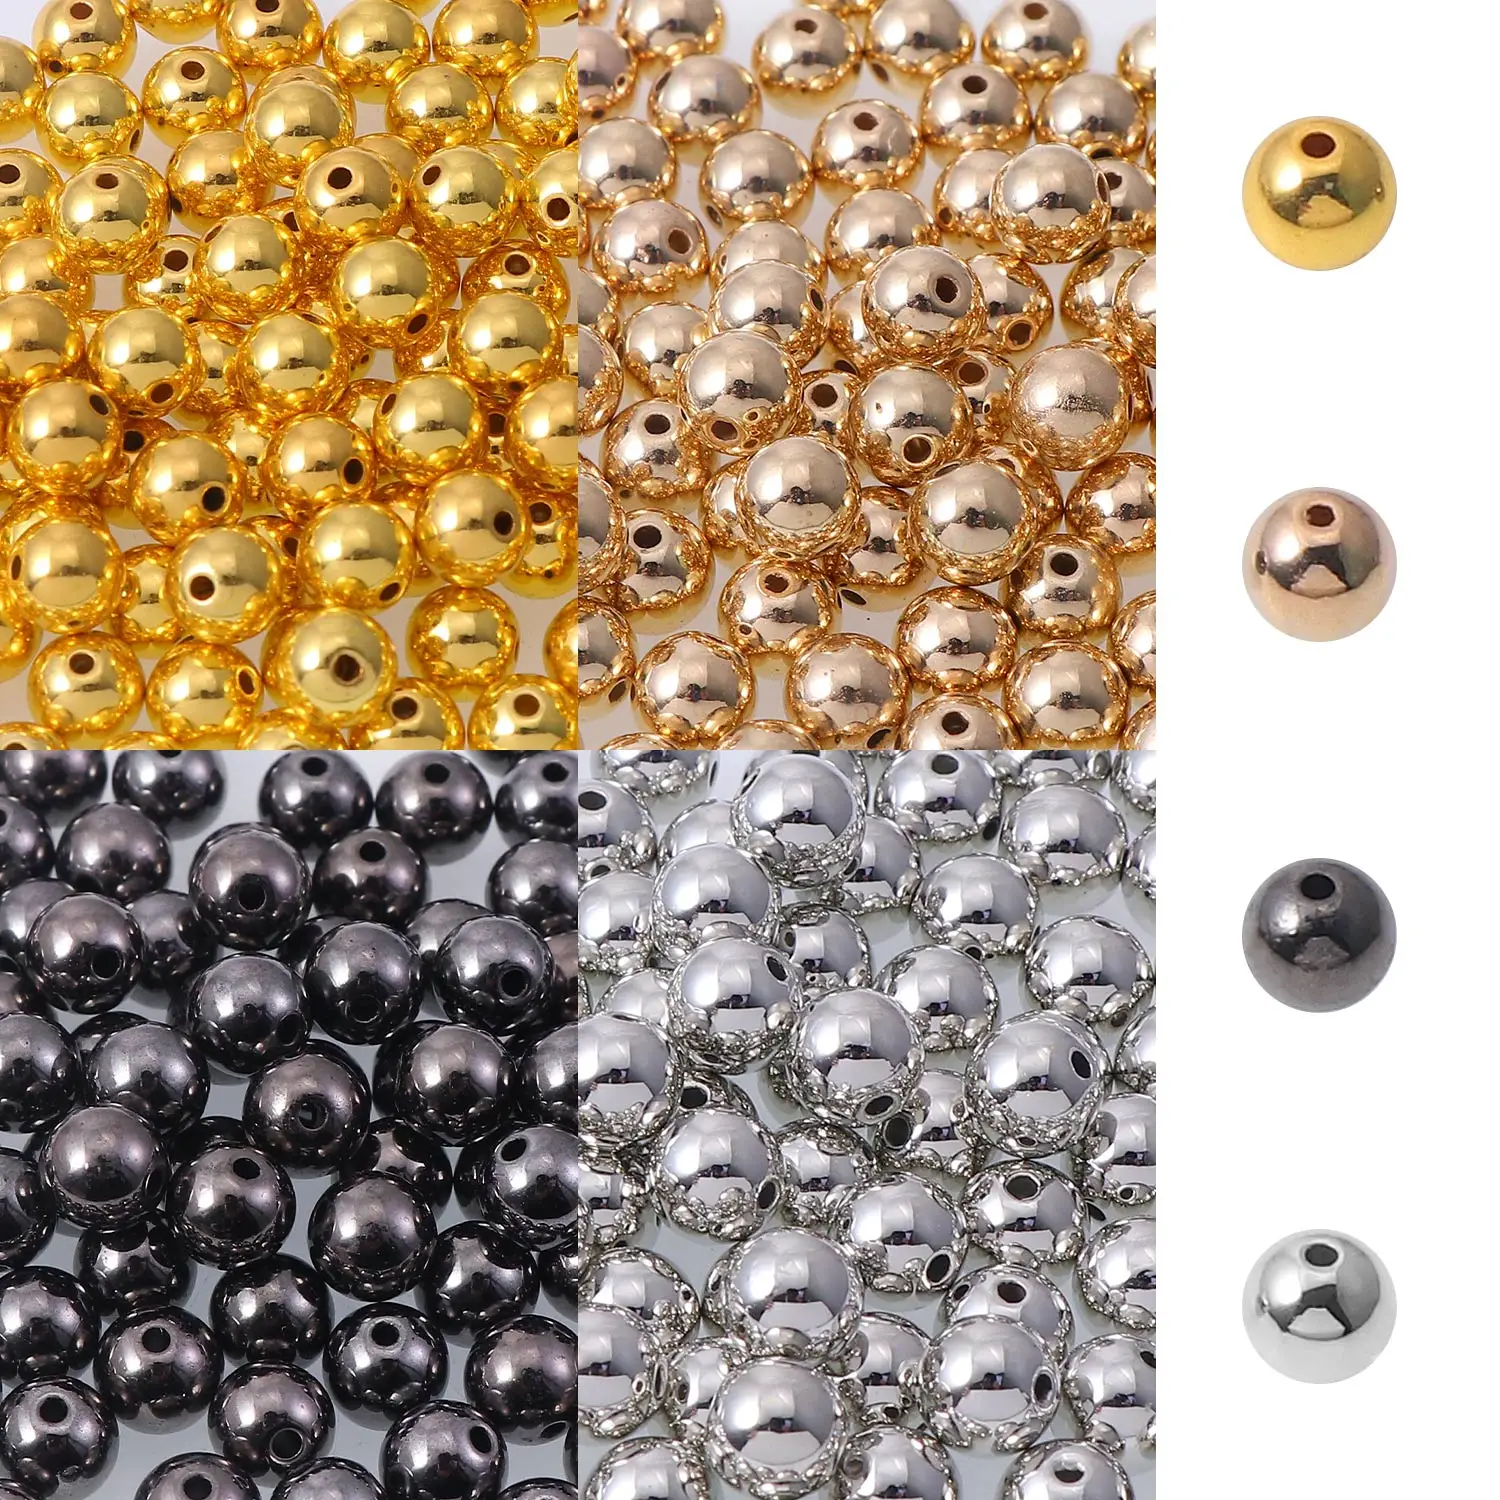 100PCS Silver/Gold Plated Round Spacer Loose Beads Jewelry Findings 3/4/6/8/10mm 